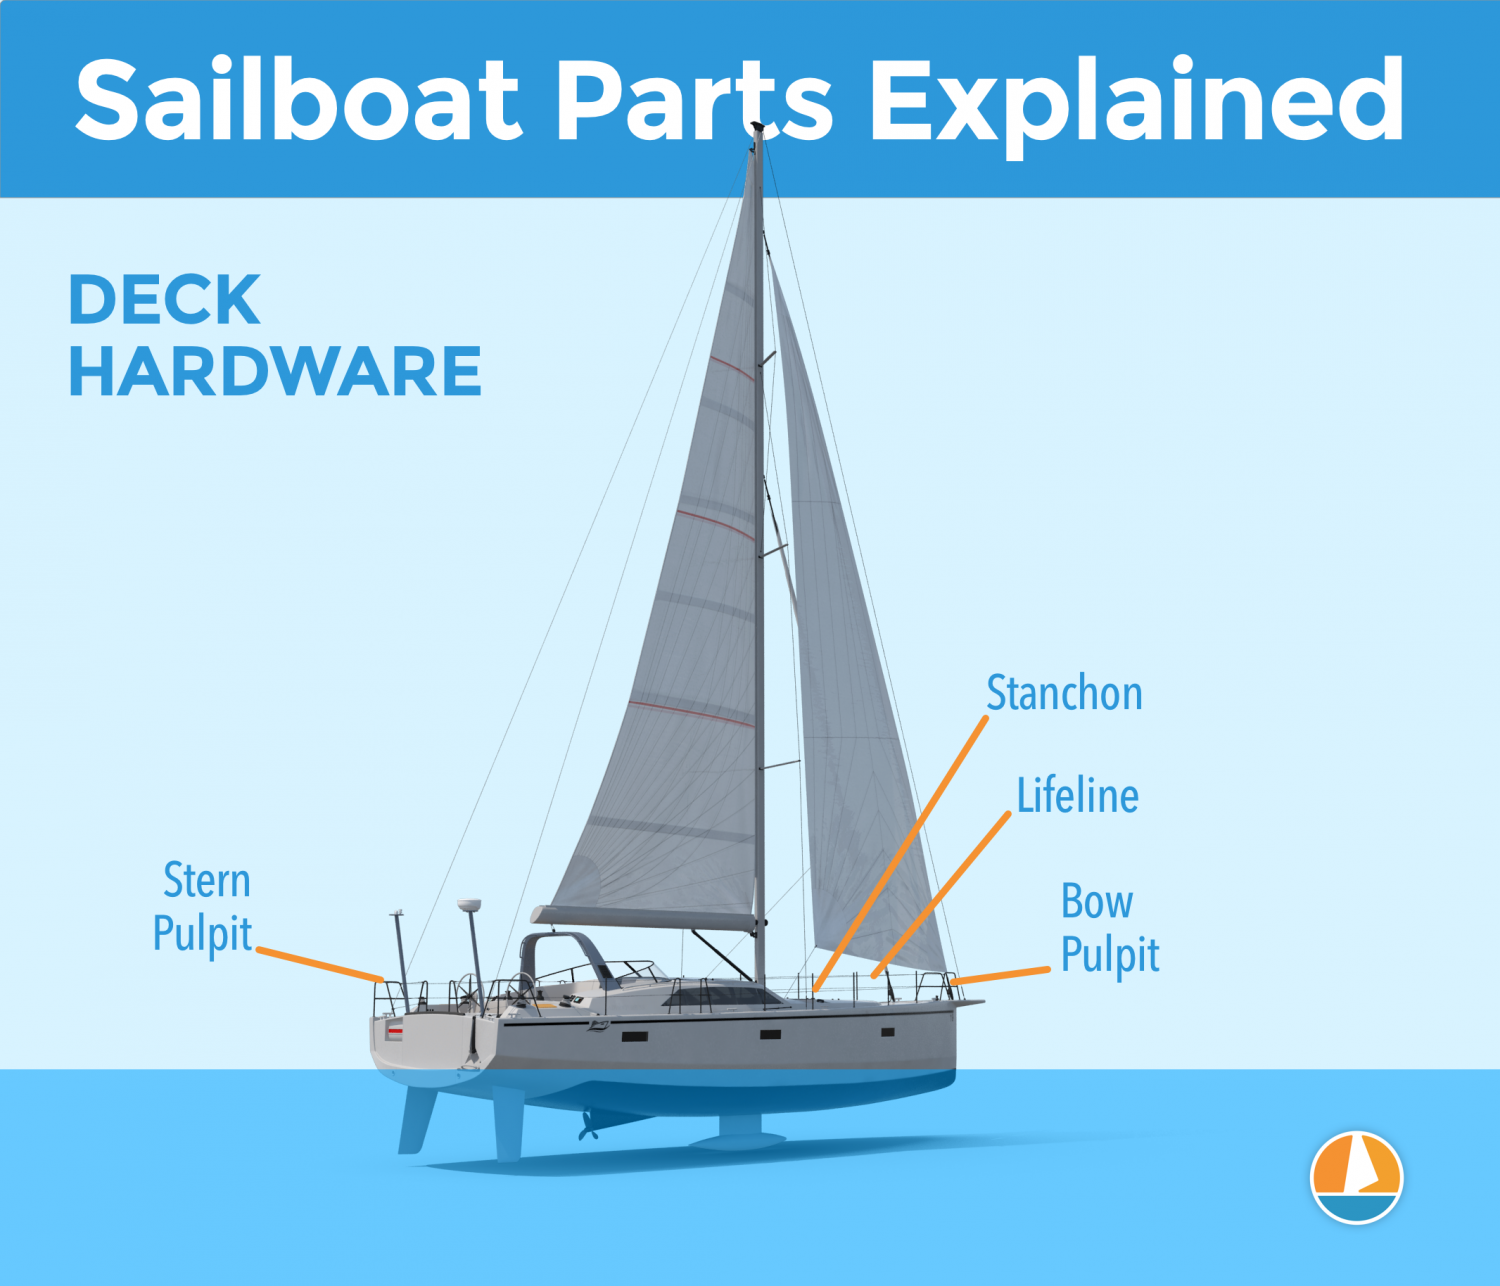 Diagram of the Deck Hardware Parts of a sailboat